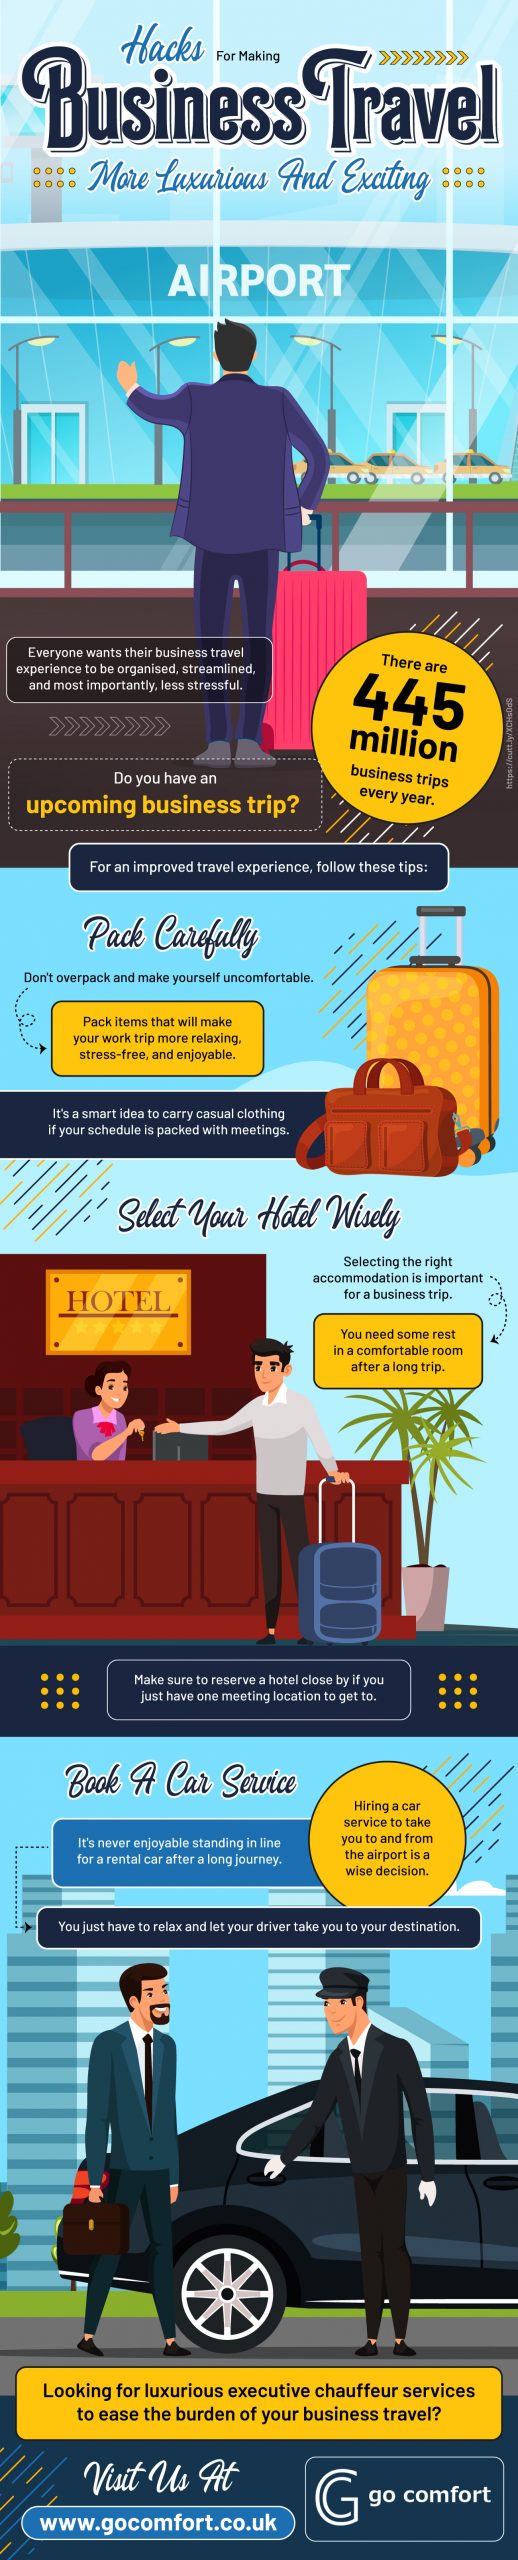 Hacks For Making Business Travel More Luxurious And Exciting